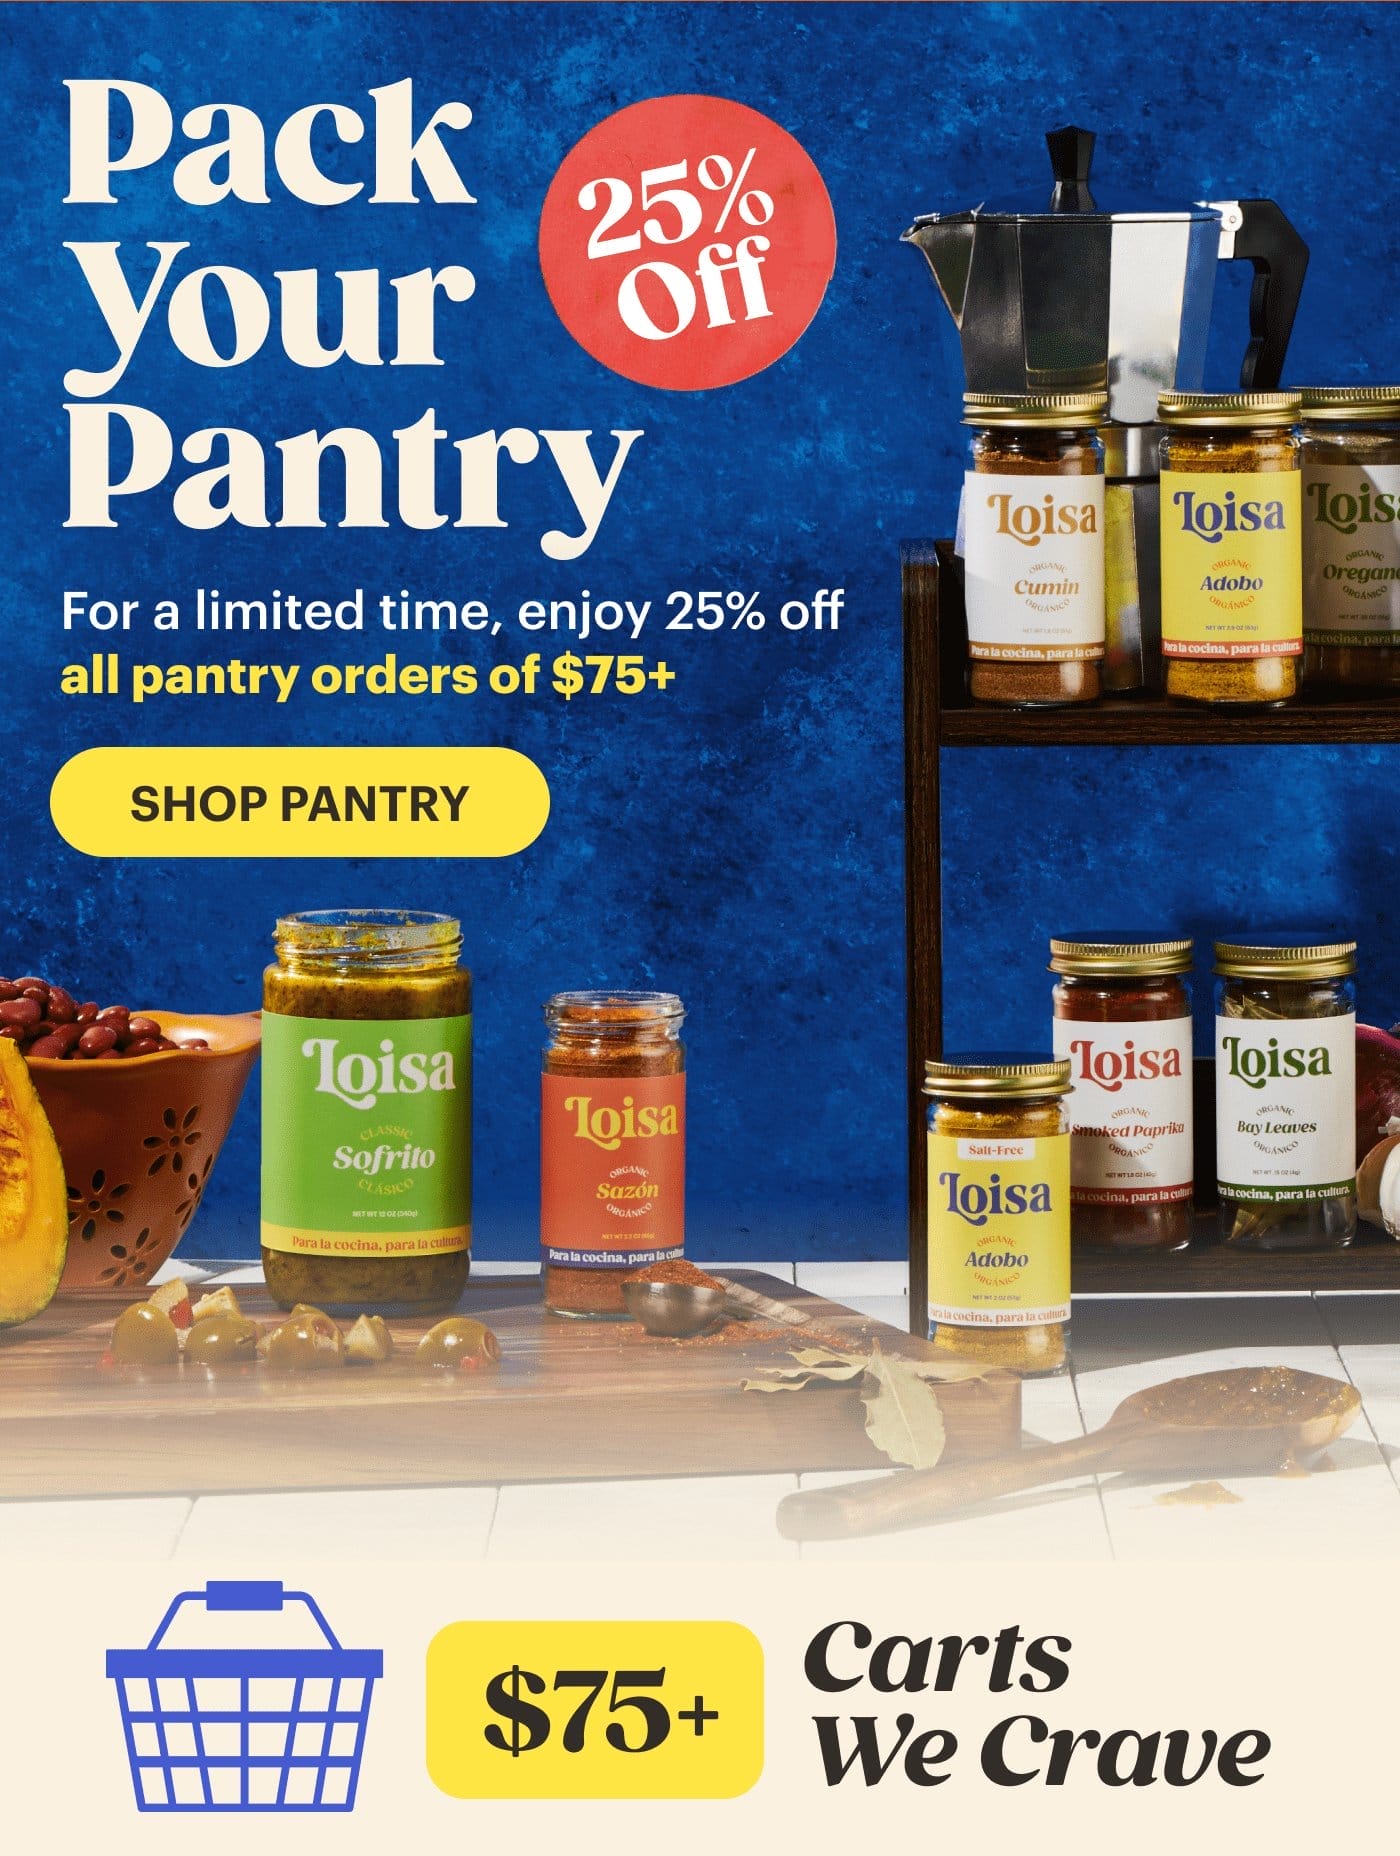 Pack Your Pantry! SHOP PANTRY